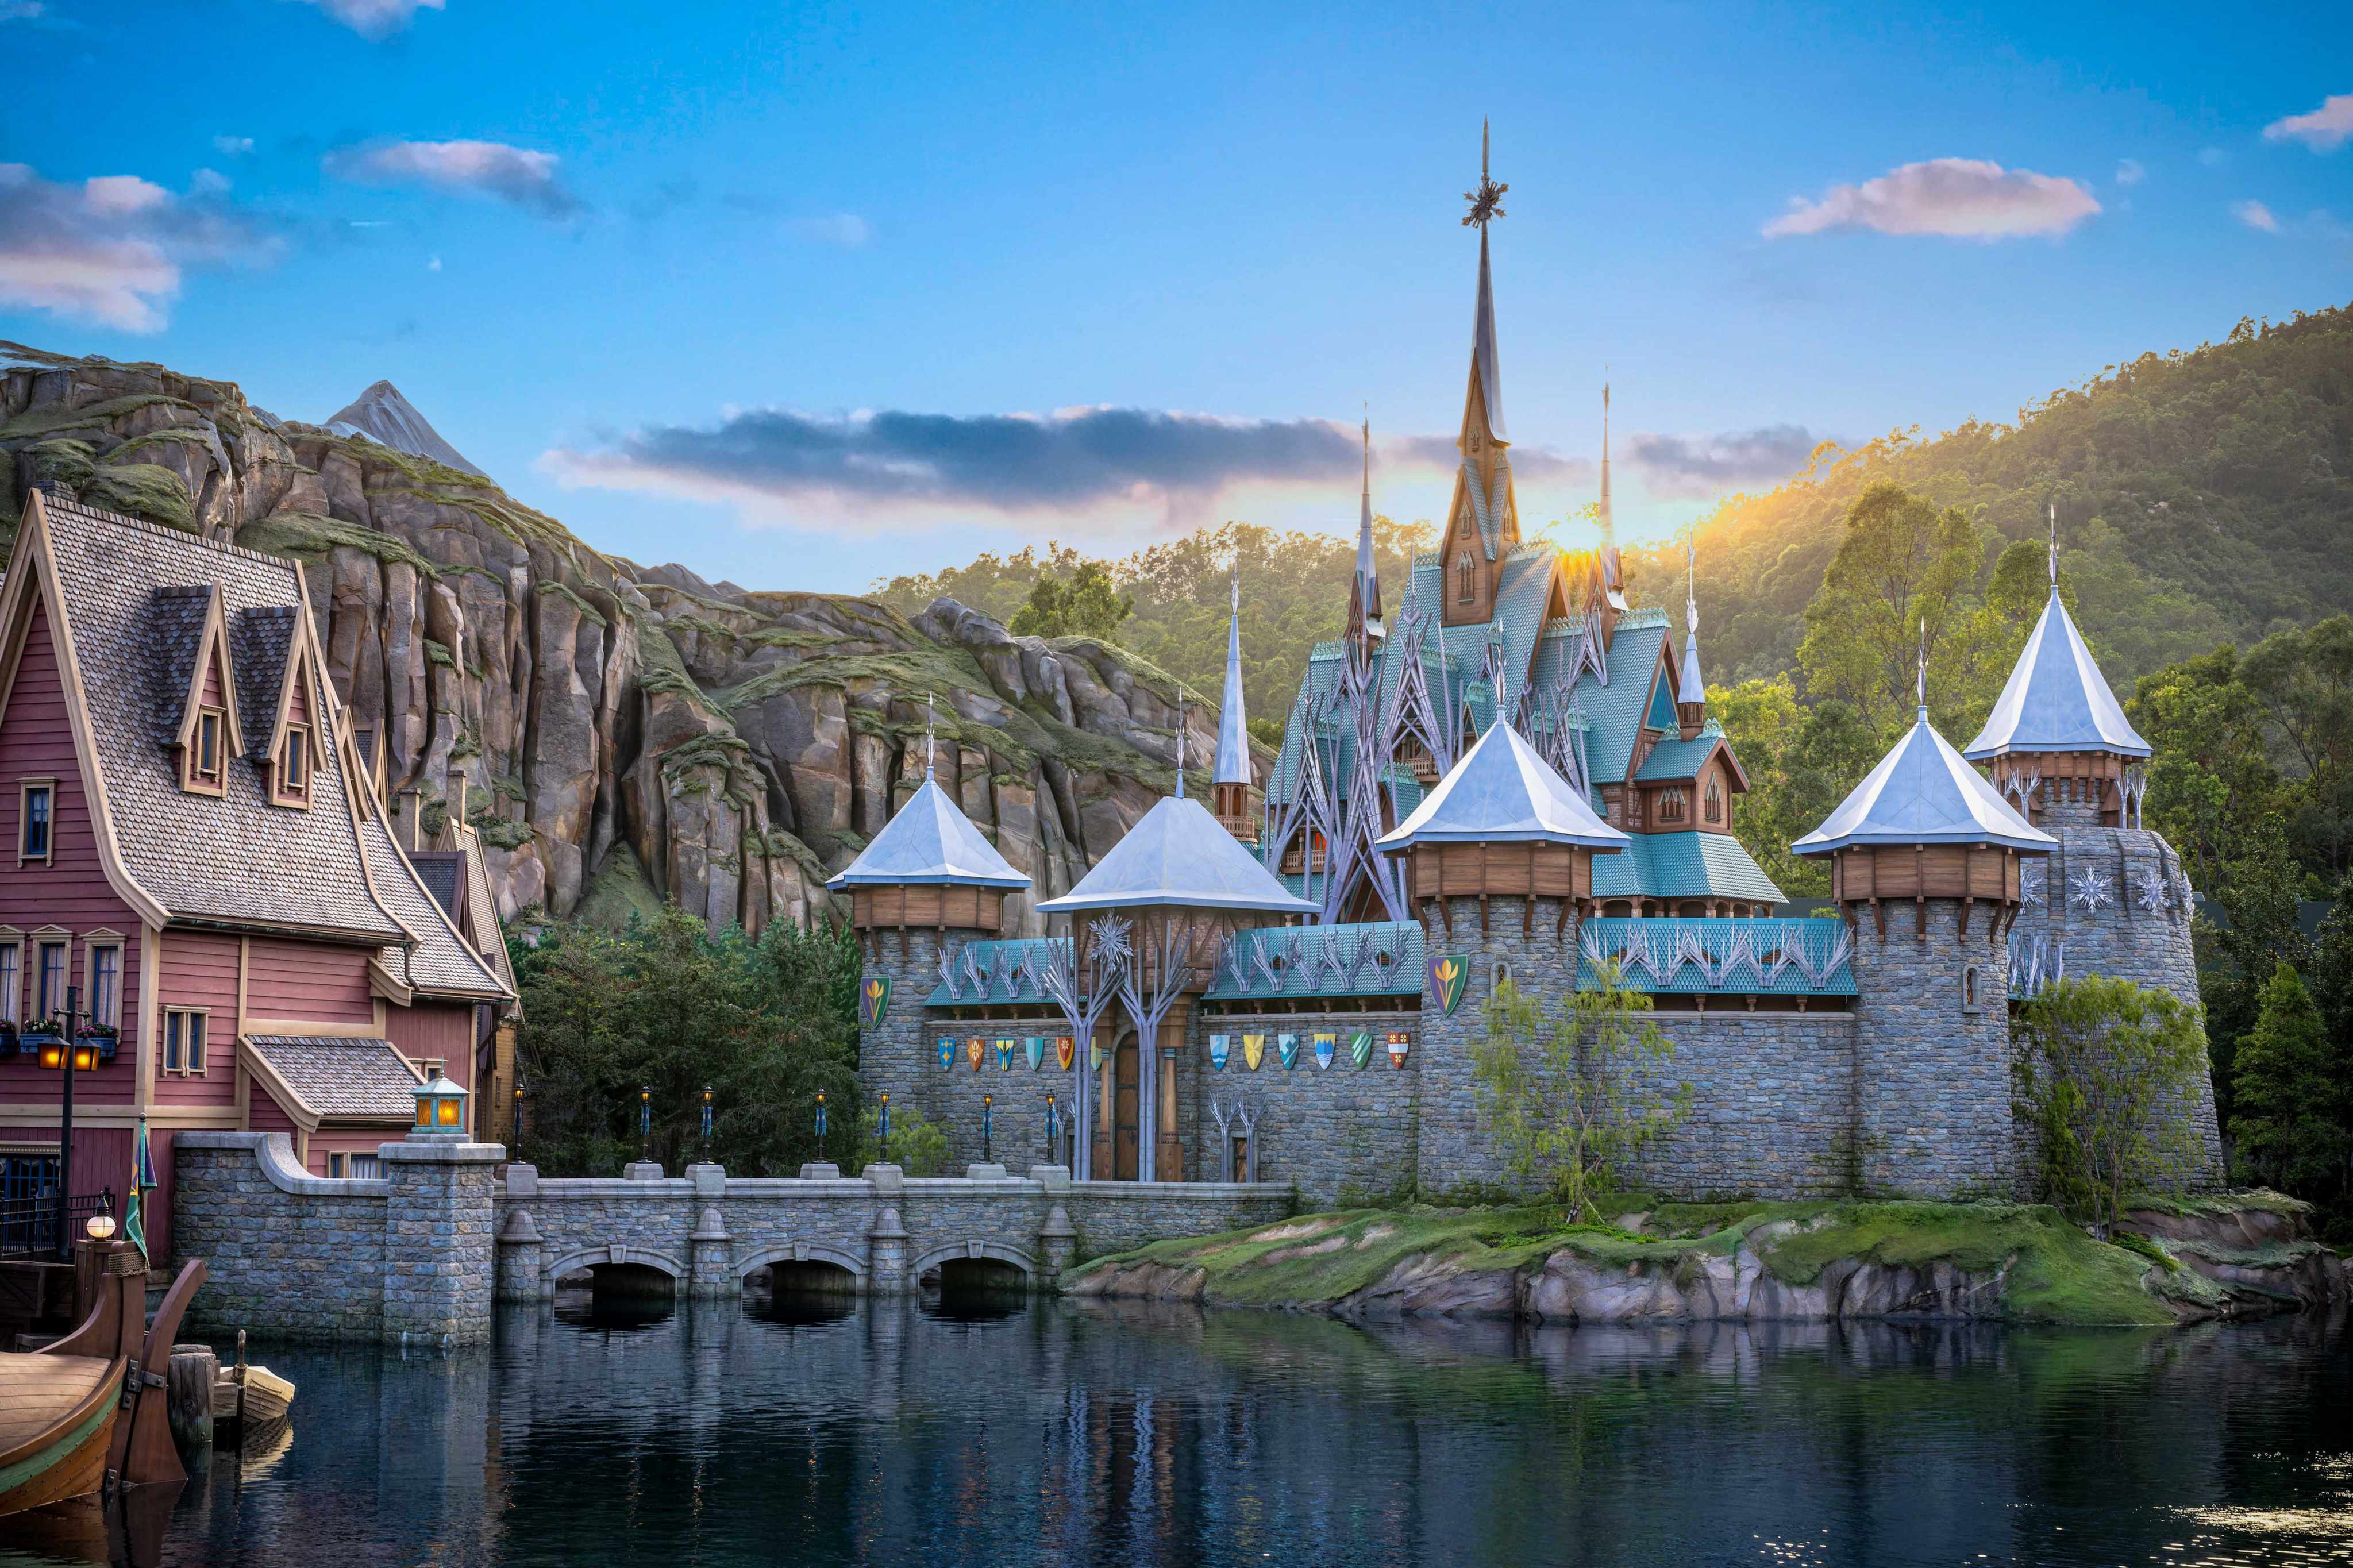 Hong Kong Disneyland unveils new World of Frozen, complete with shows and  rides to immerse you in the Kingdom of Arendelle - YP